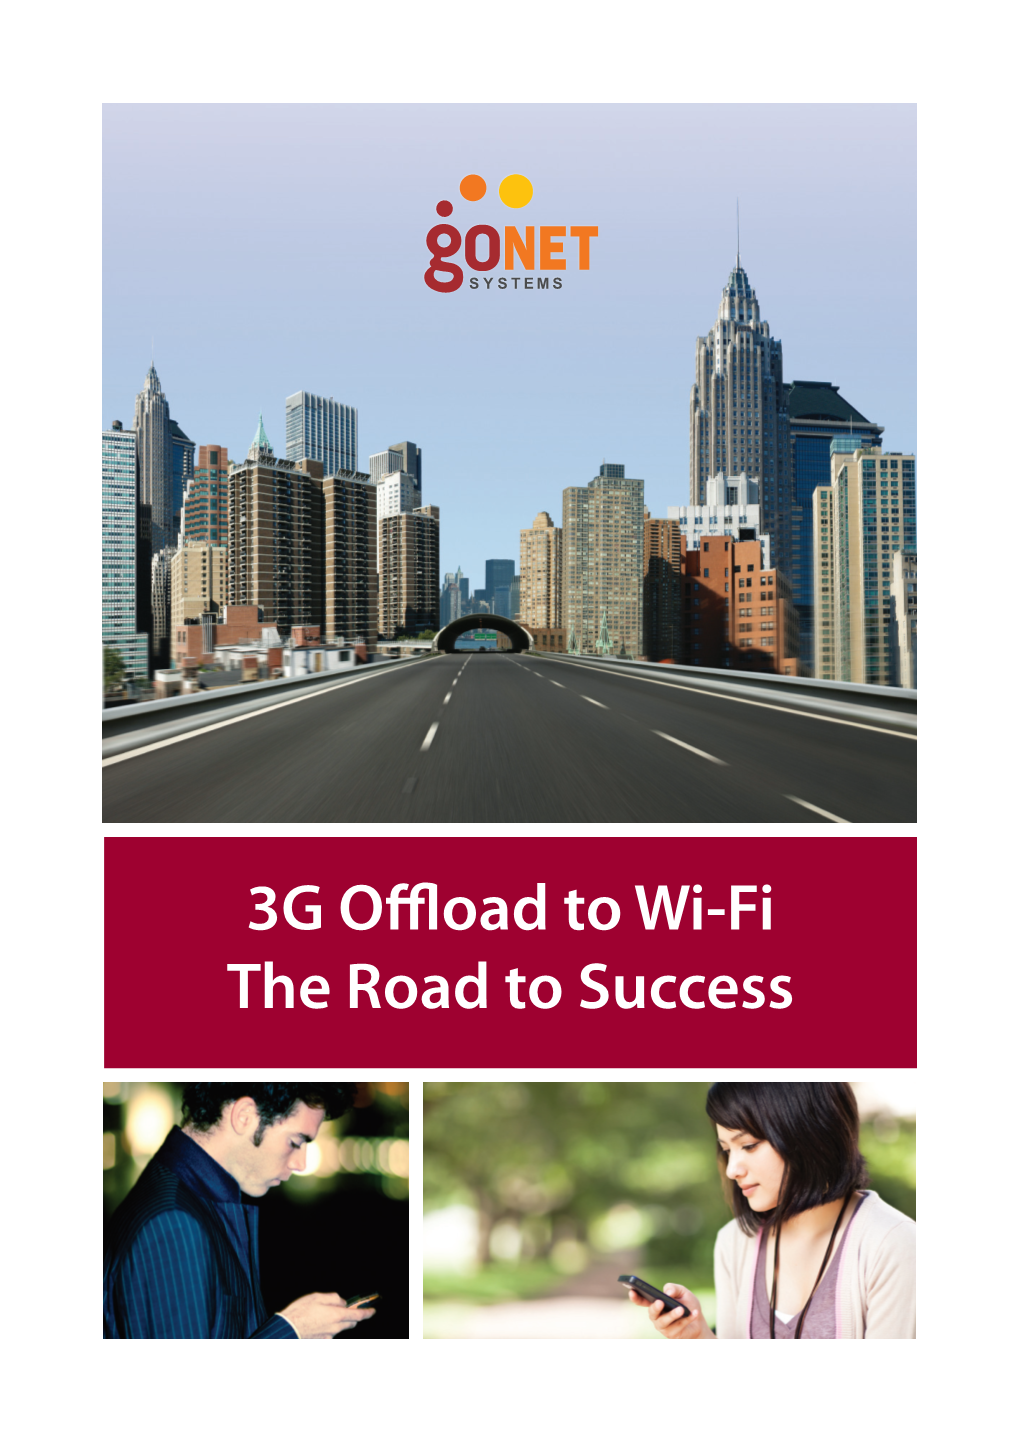 3G Offload to Wi-Fi the Road to Success